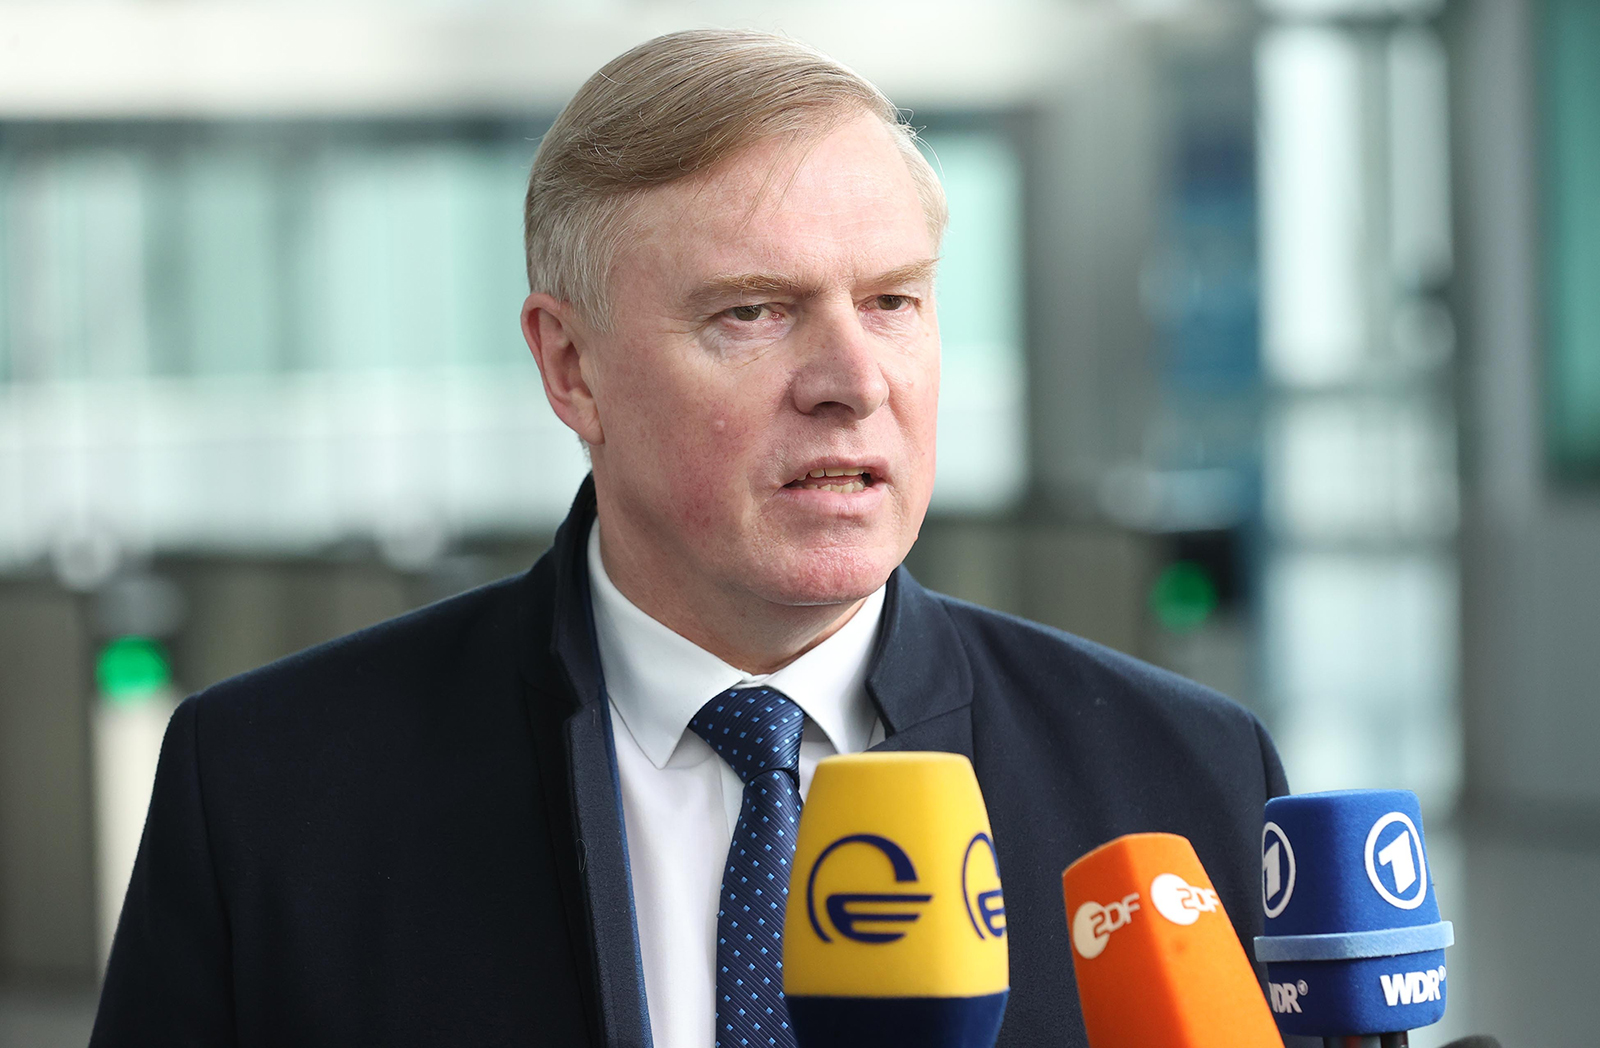 Defense Minister of Estonia Kalle Laanet speaks to the press in Brussels, Belgium on March 16. 